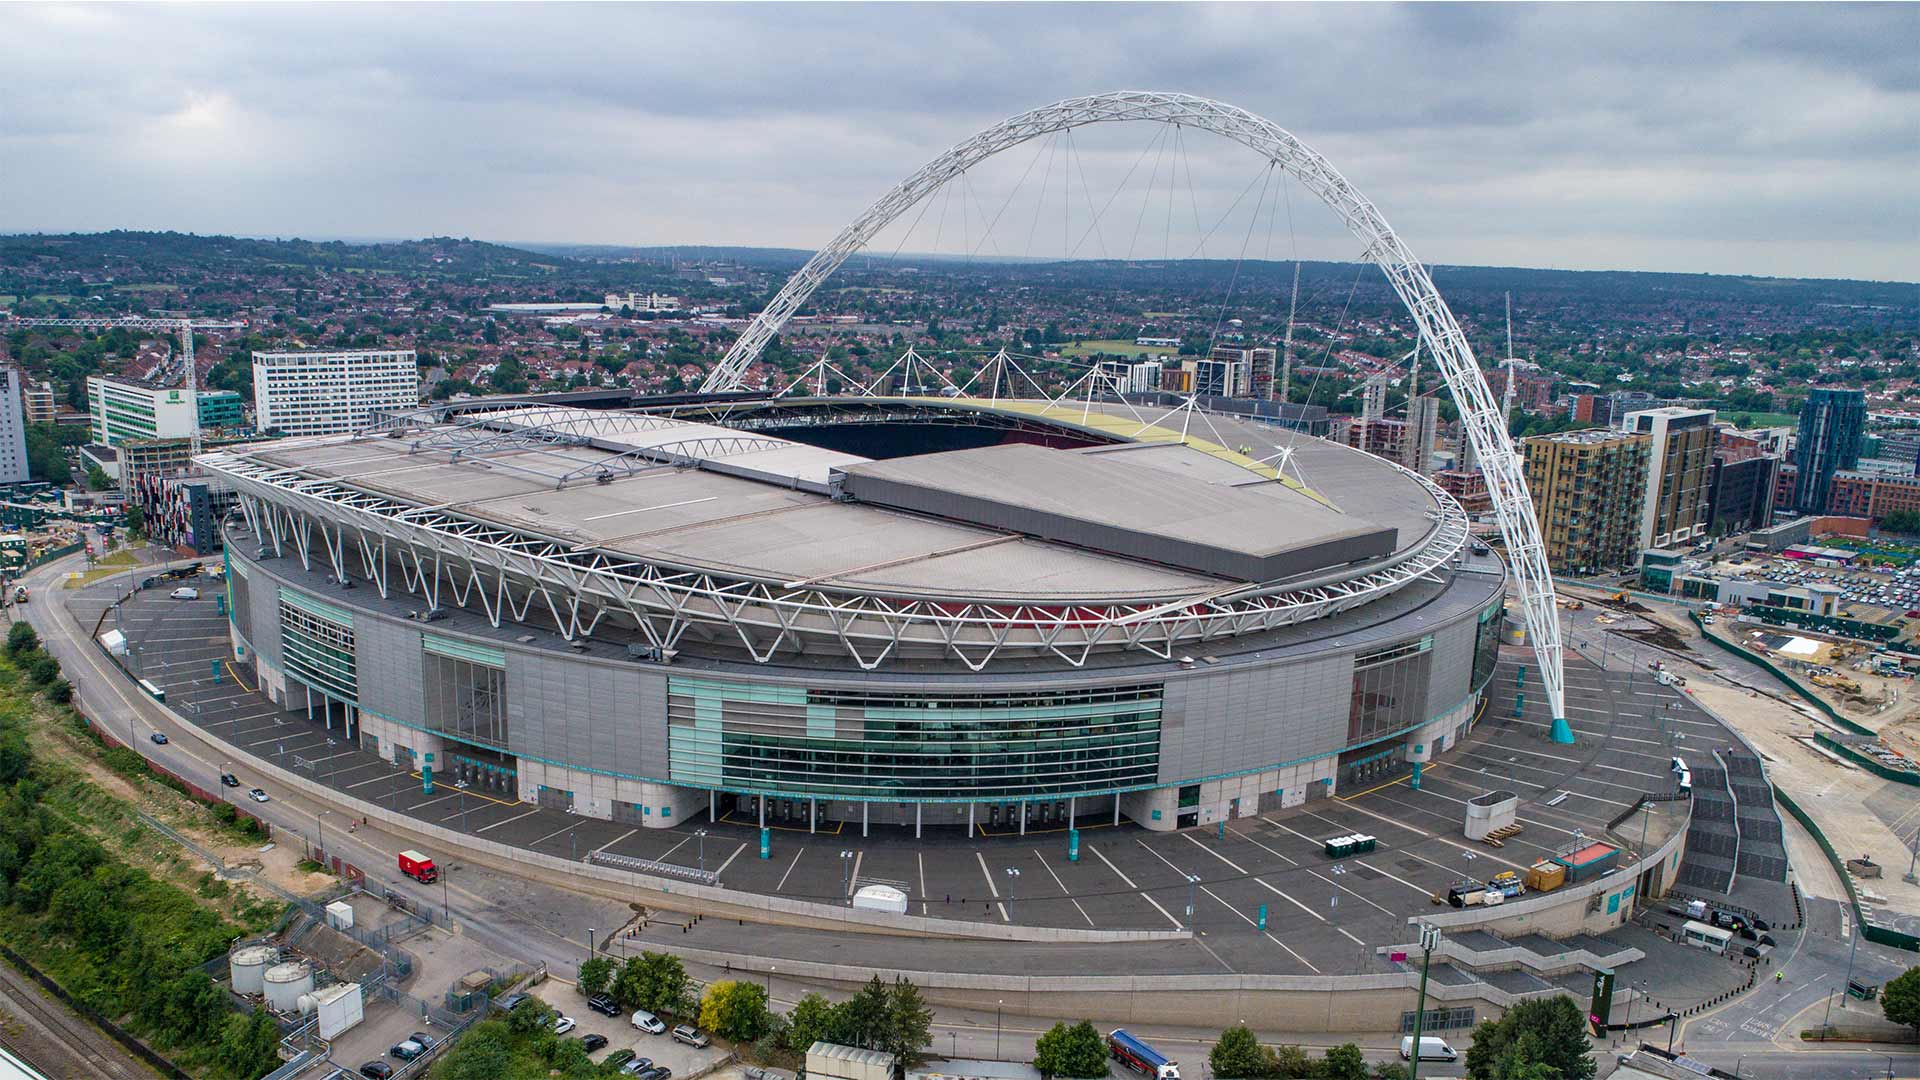 Wembley Stadion – Haas Strahlcenter